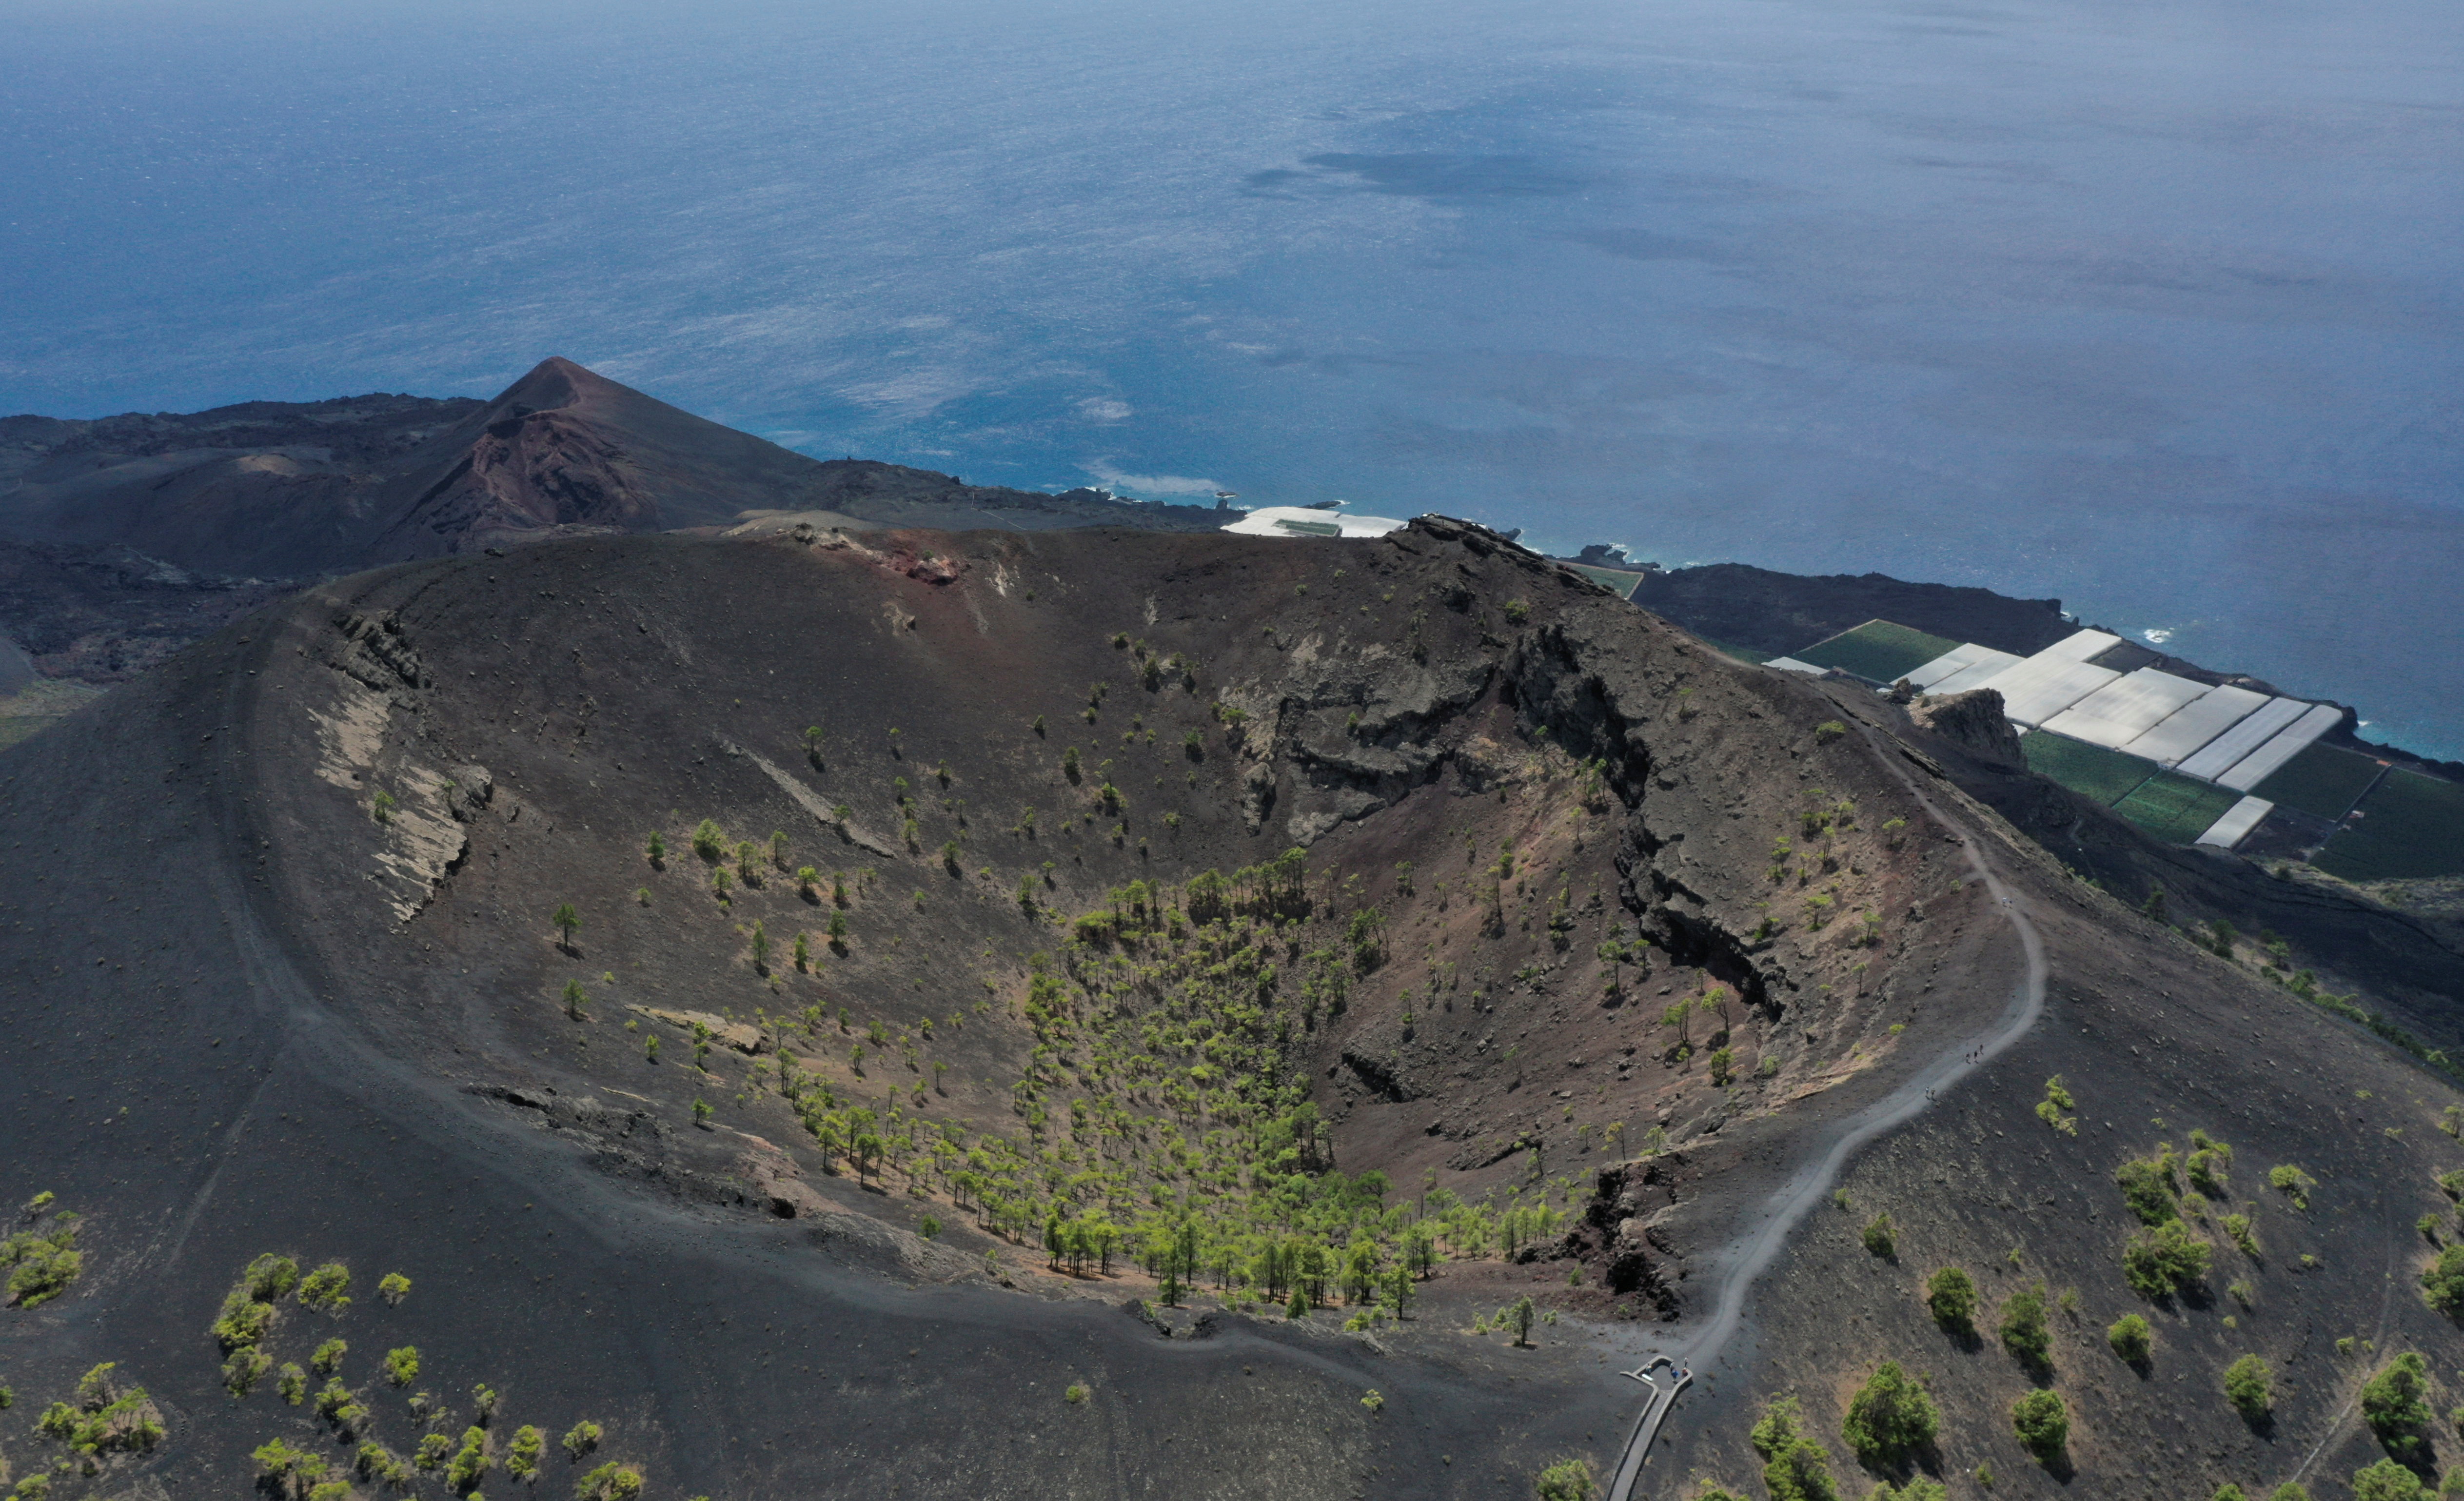 An aerial view of San Antonio Volcano in the foreground and Teneguia Volcano in the background on the Canary Island of La Palma